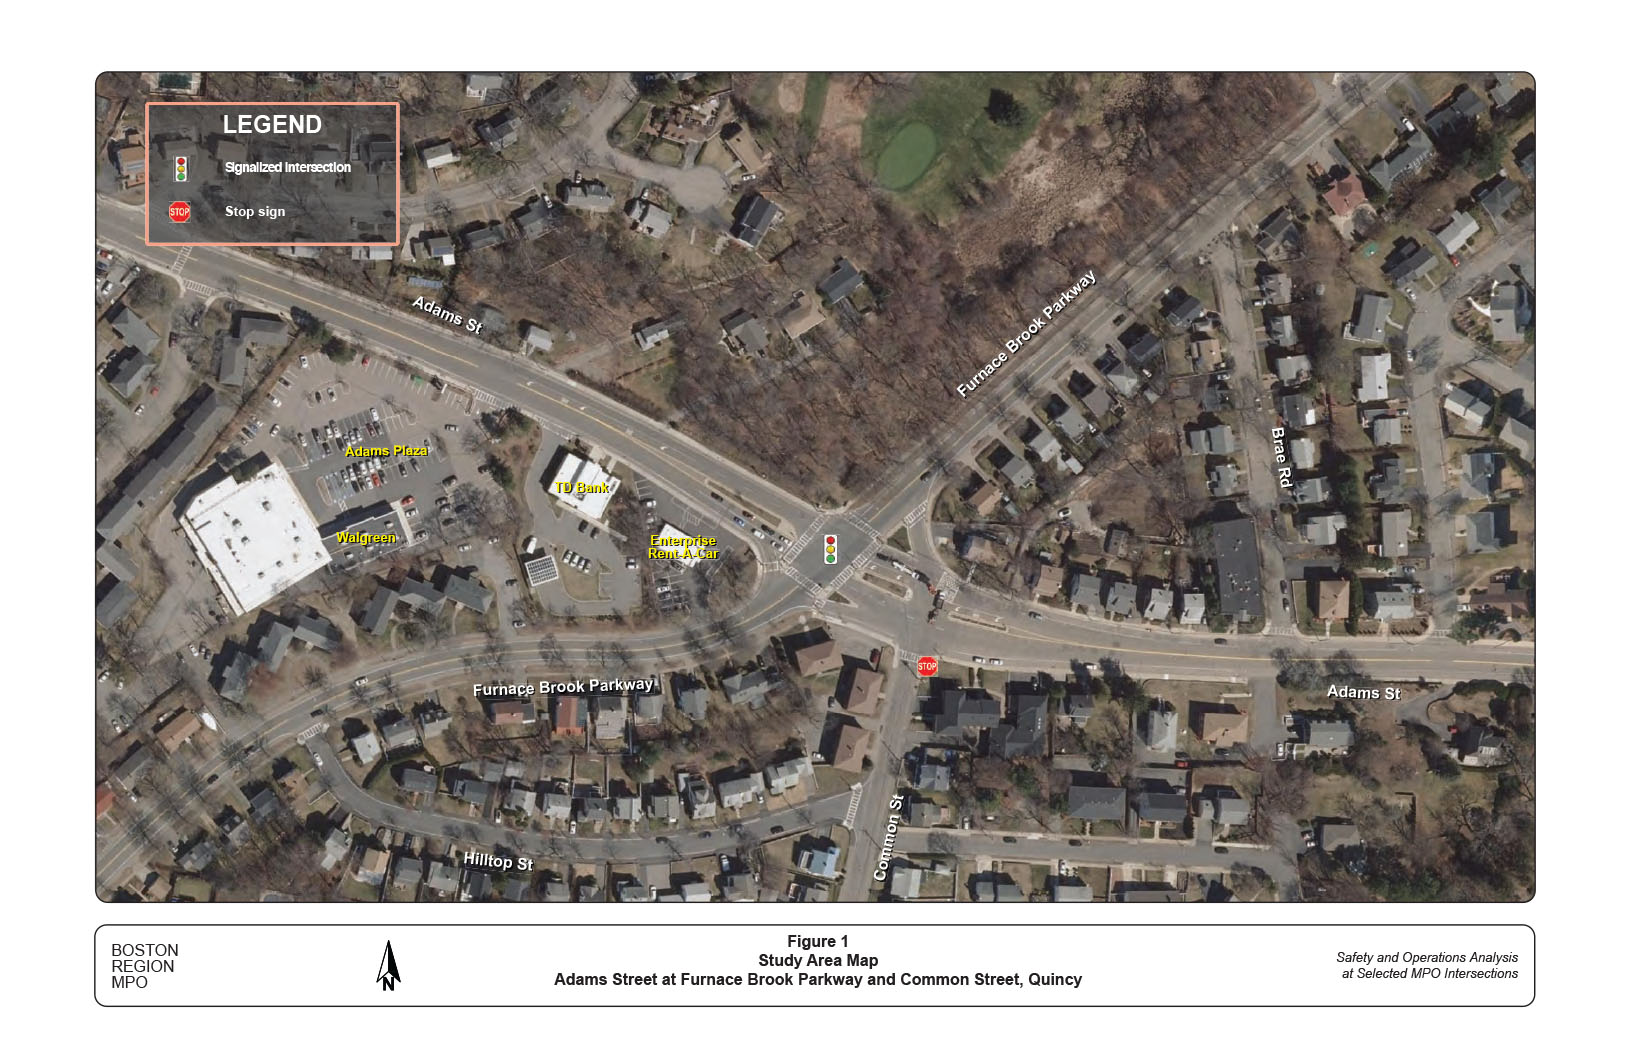 Figure 1: Study Area
This figure shows a map of the study area with satellite imagery that shows existing roadway layout.

